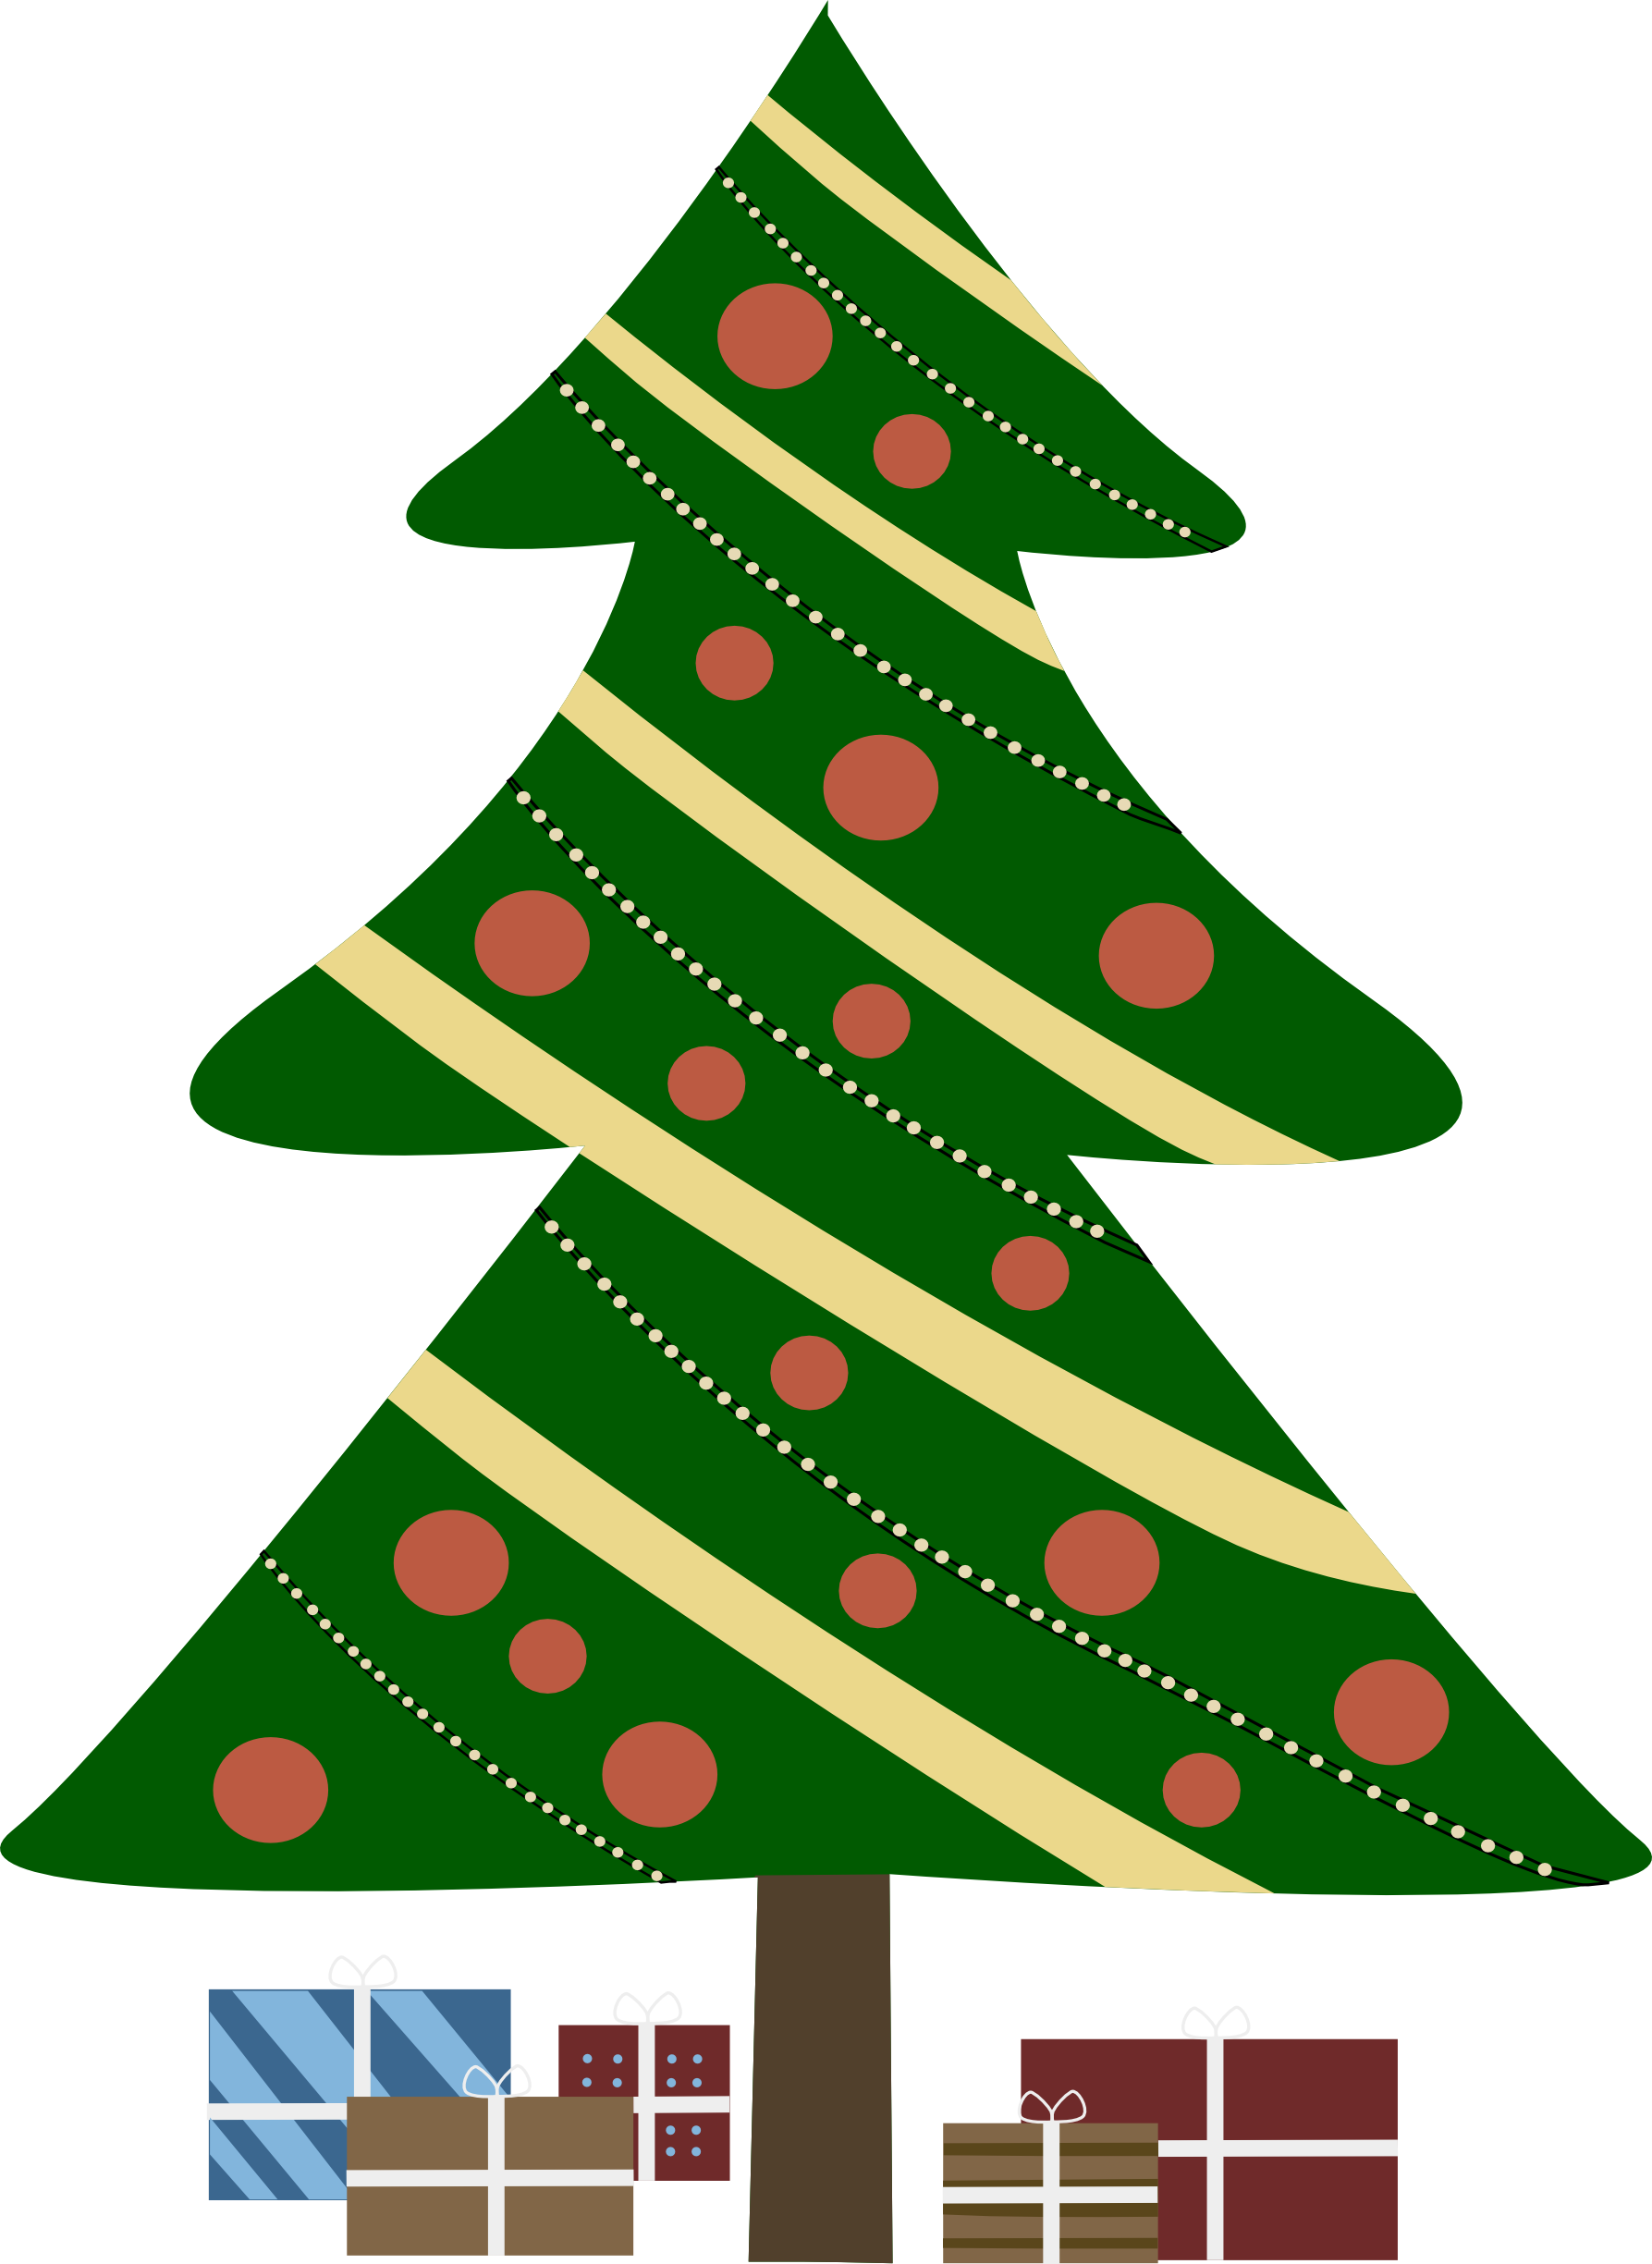 Free Christmas Tree With Presents Clipart Download Free Christmas Tree With Presents Clipart